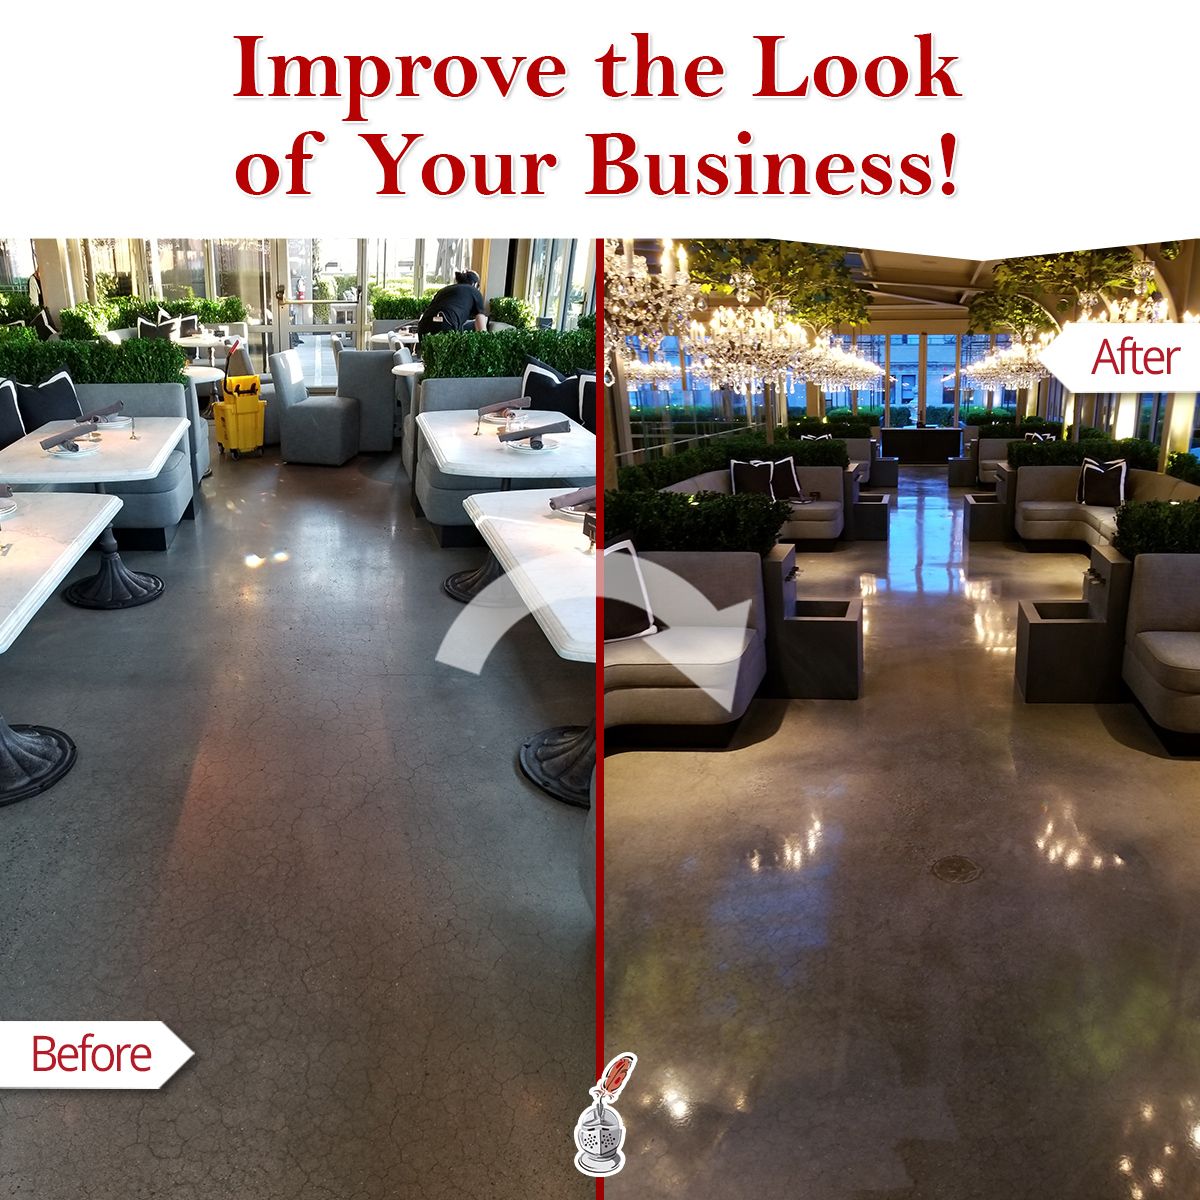 Improve the Look of Your Business!